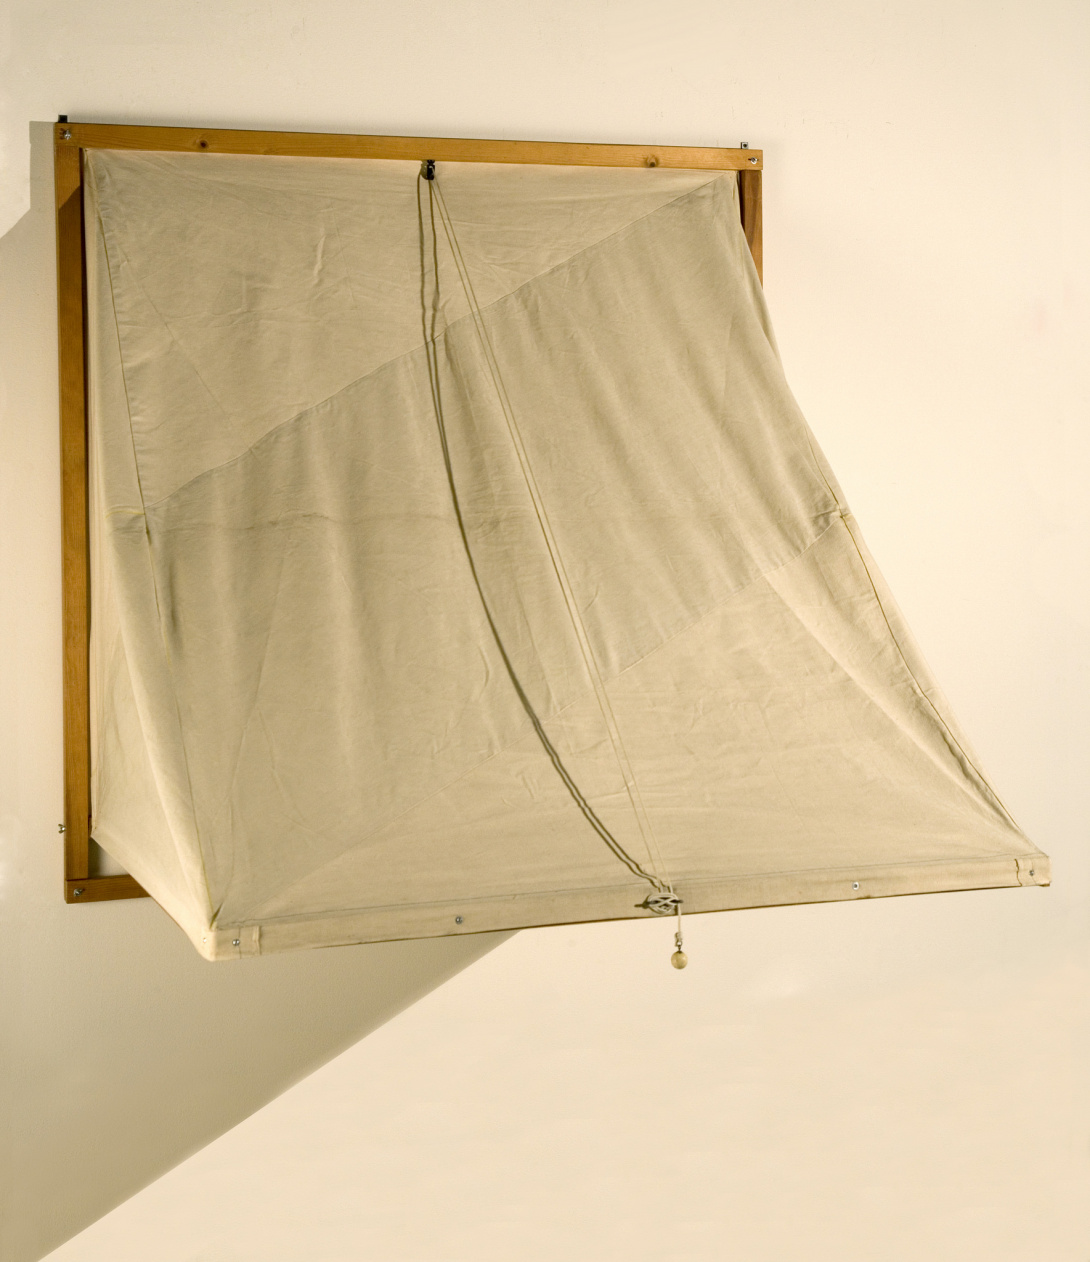 At first glance, it resembles a window being shaded from outside light. Upon closer inspection, it is a square, wooden frame with a piece of canvas being held by thin rope. 